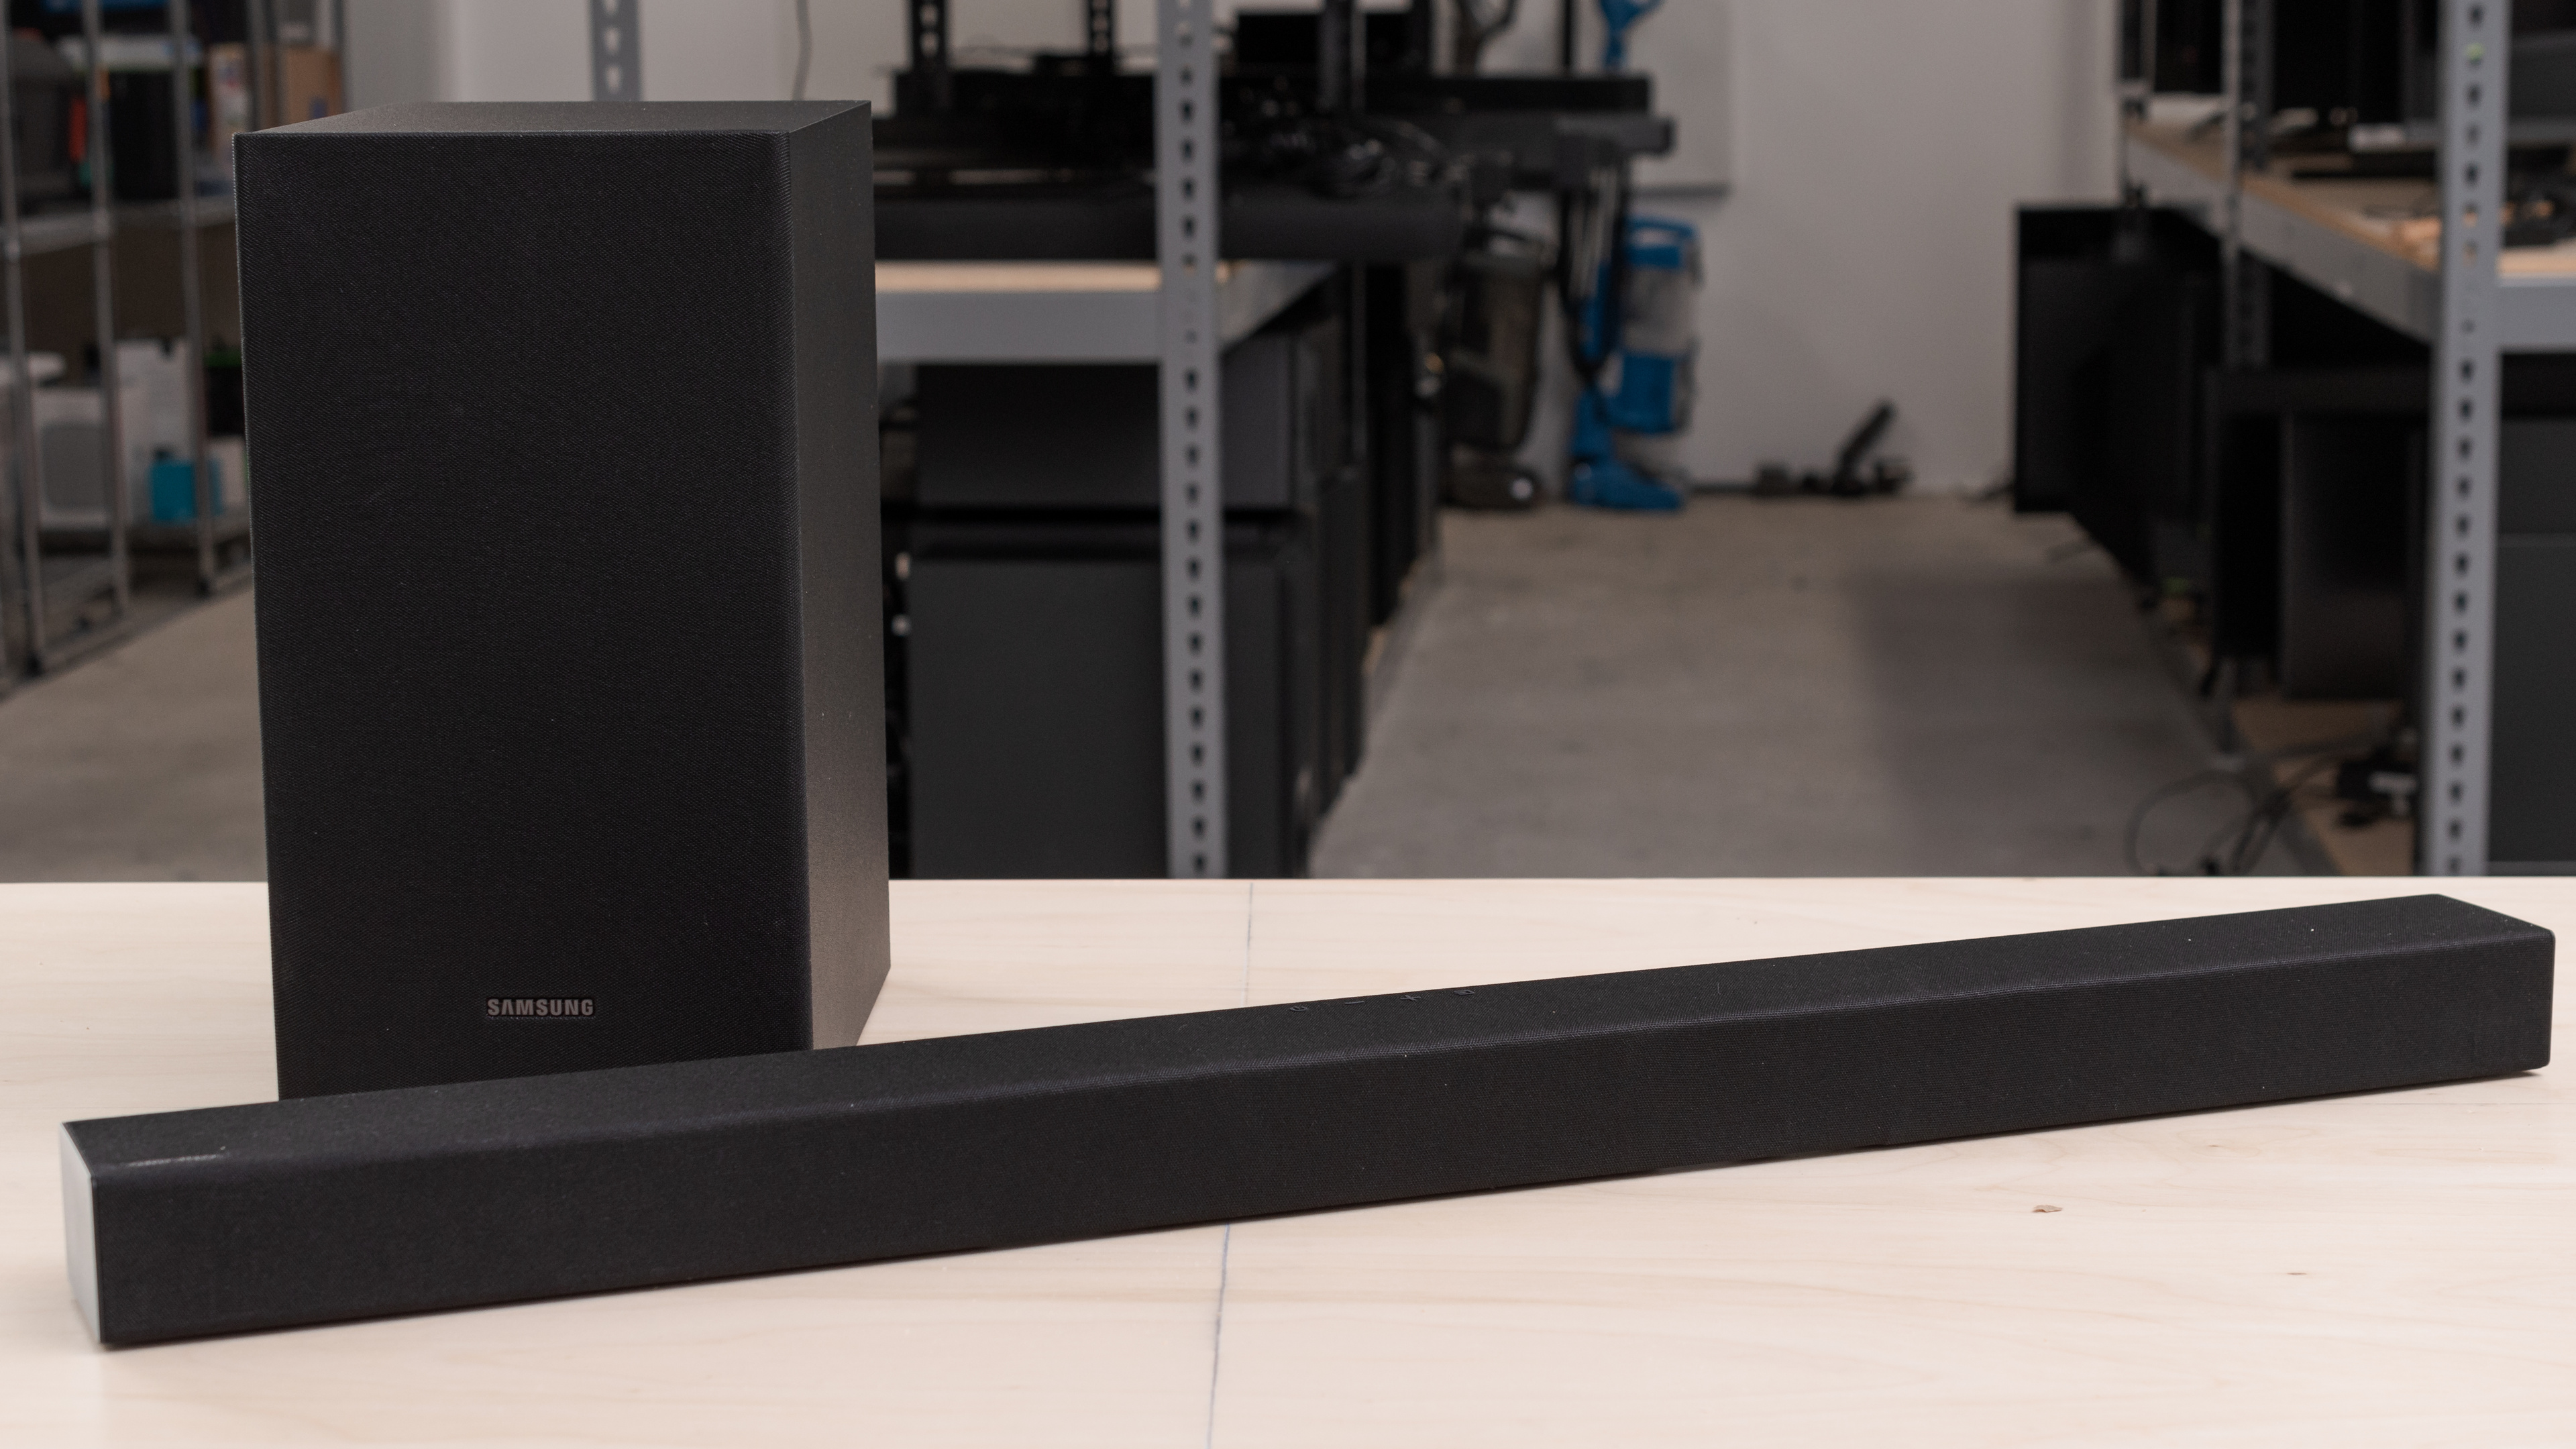 himmel forstørrelse Cornwall RTINGS.com on Twitter: "Looking for a simple 2.1 soundbar to upgrade from  your TV speakers? Check our review of the Samsung HW-T450 soundbar from the  2020 lineup! https://t.co/CtpYGJL70t https://t.co/gBeSwoicSL" / Twitter